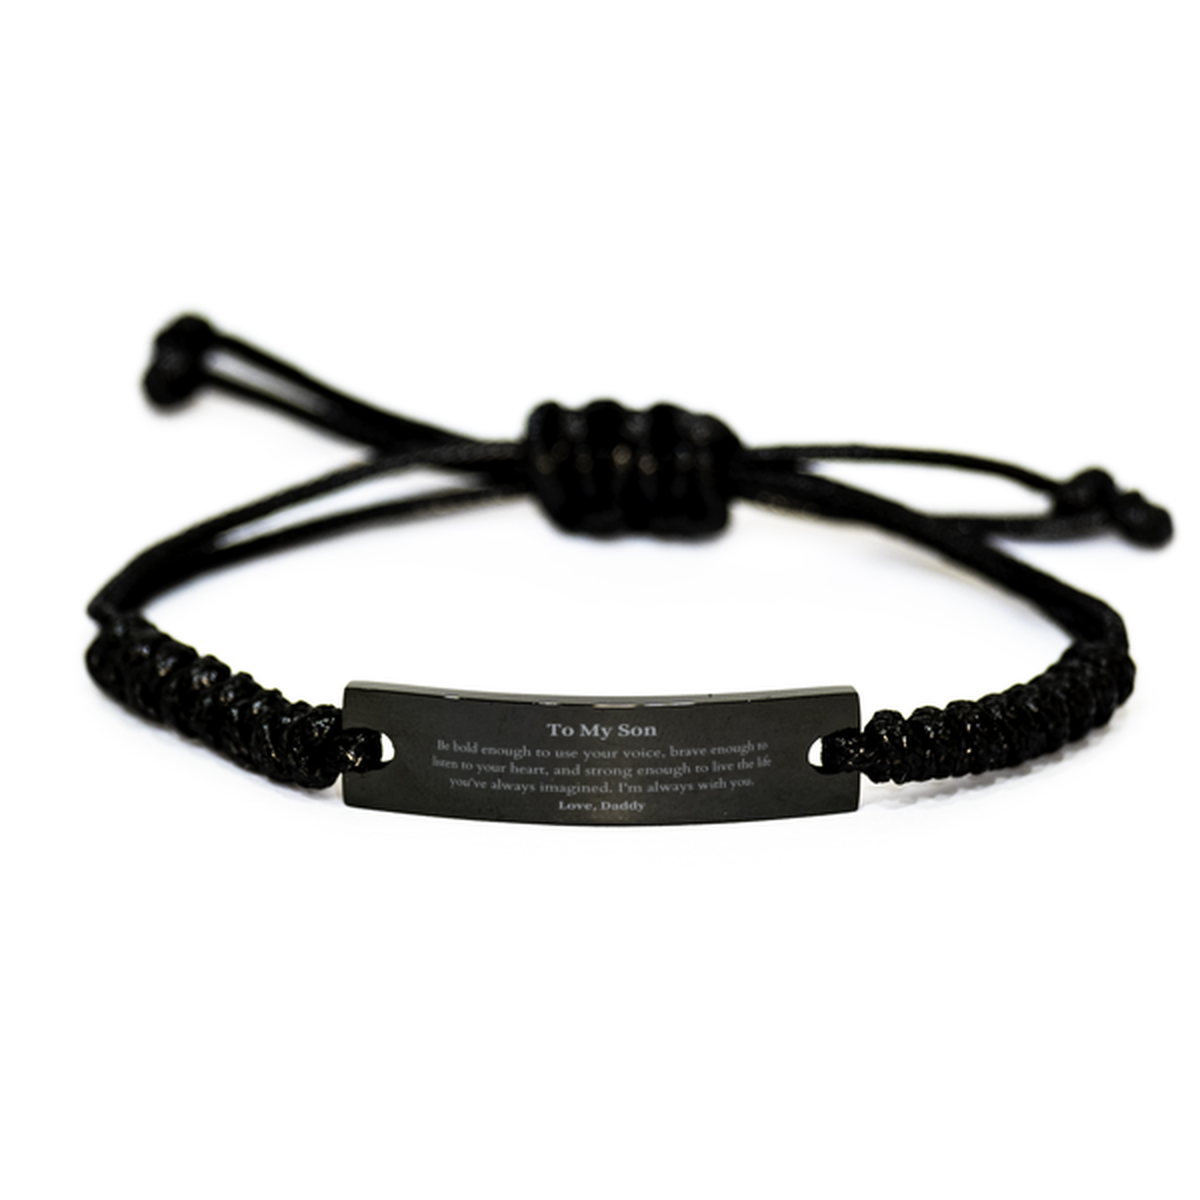 Keepsake Son Black Rope Bracelet Gift Idea Graduation Christmas Birthday Son from Daddy, Son Be bold enough to use your voice, brave enough to listen to your heart. Love, Daddy